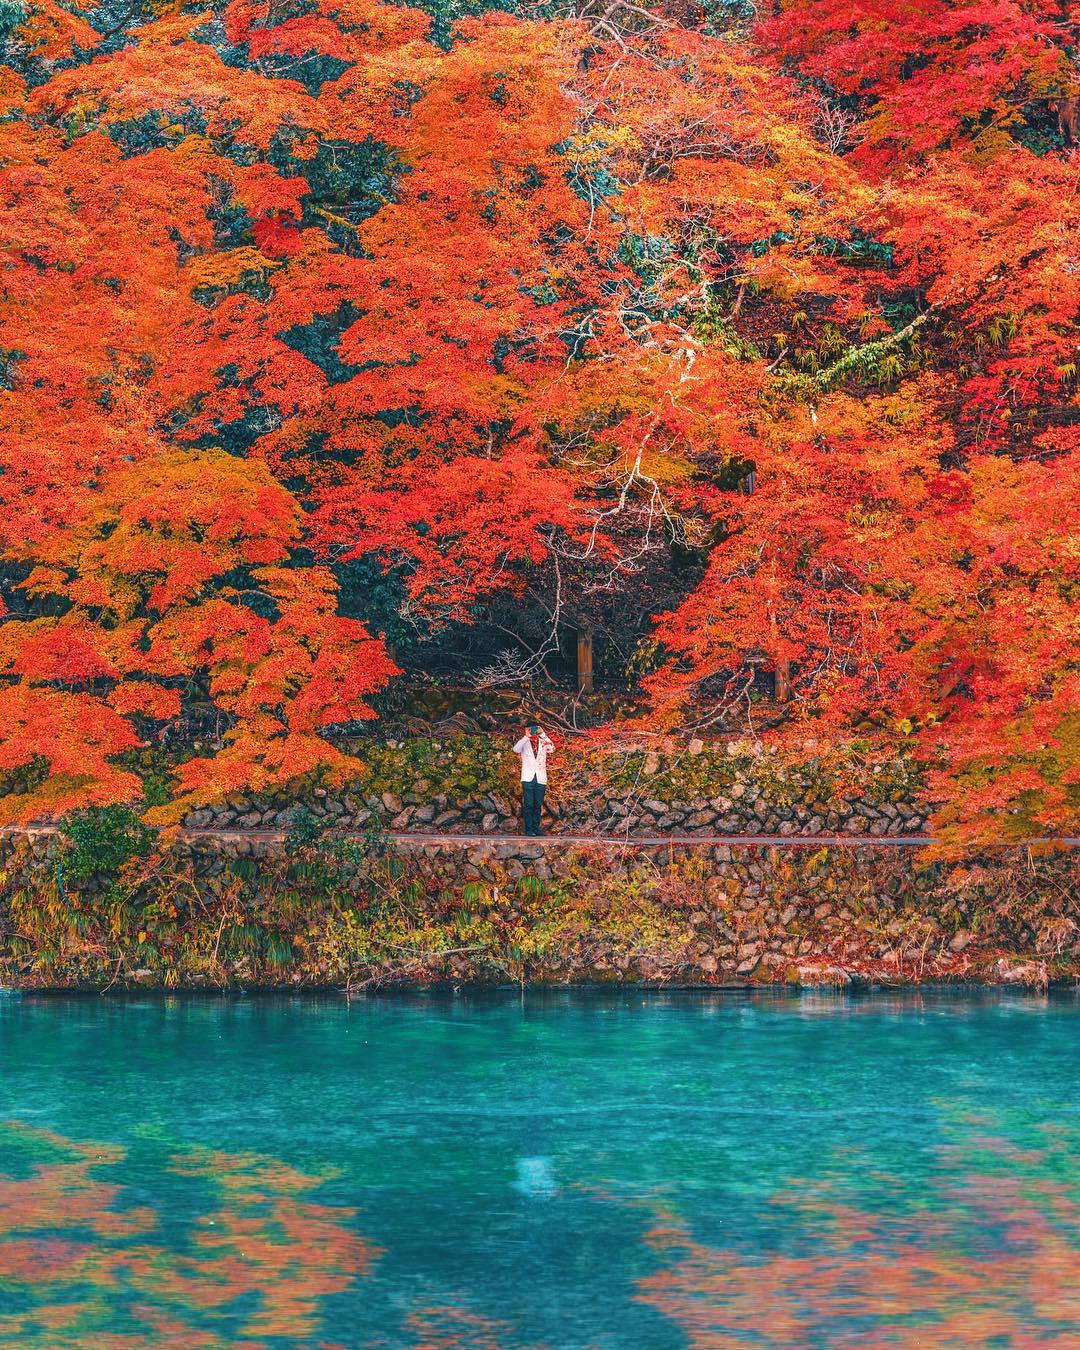 Amazing Photos From Japan (27 pics)